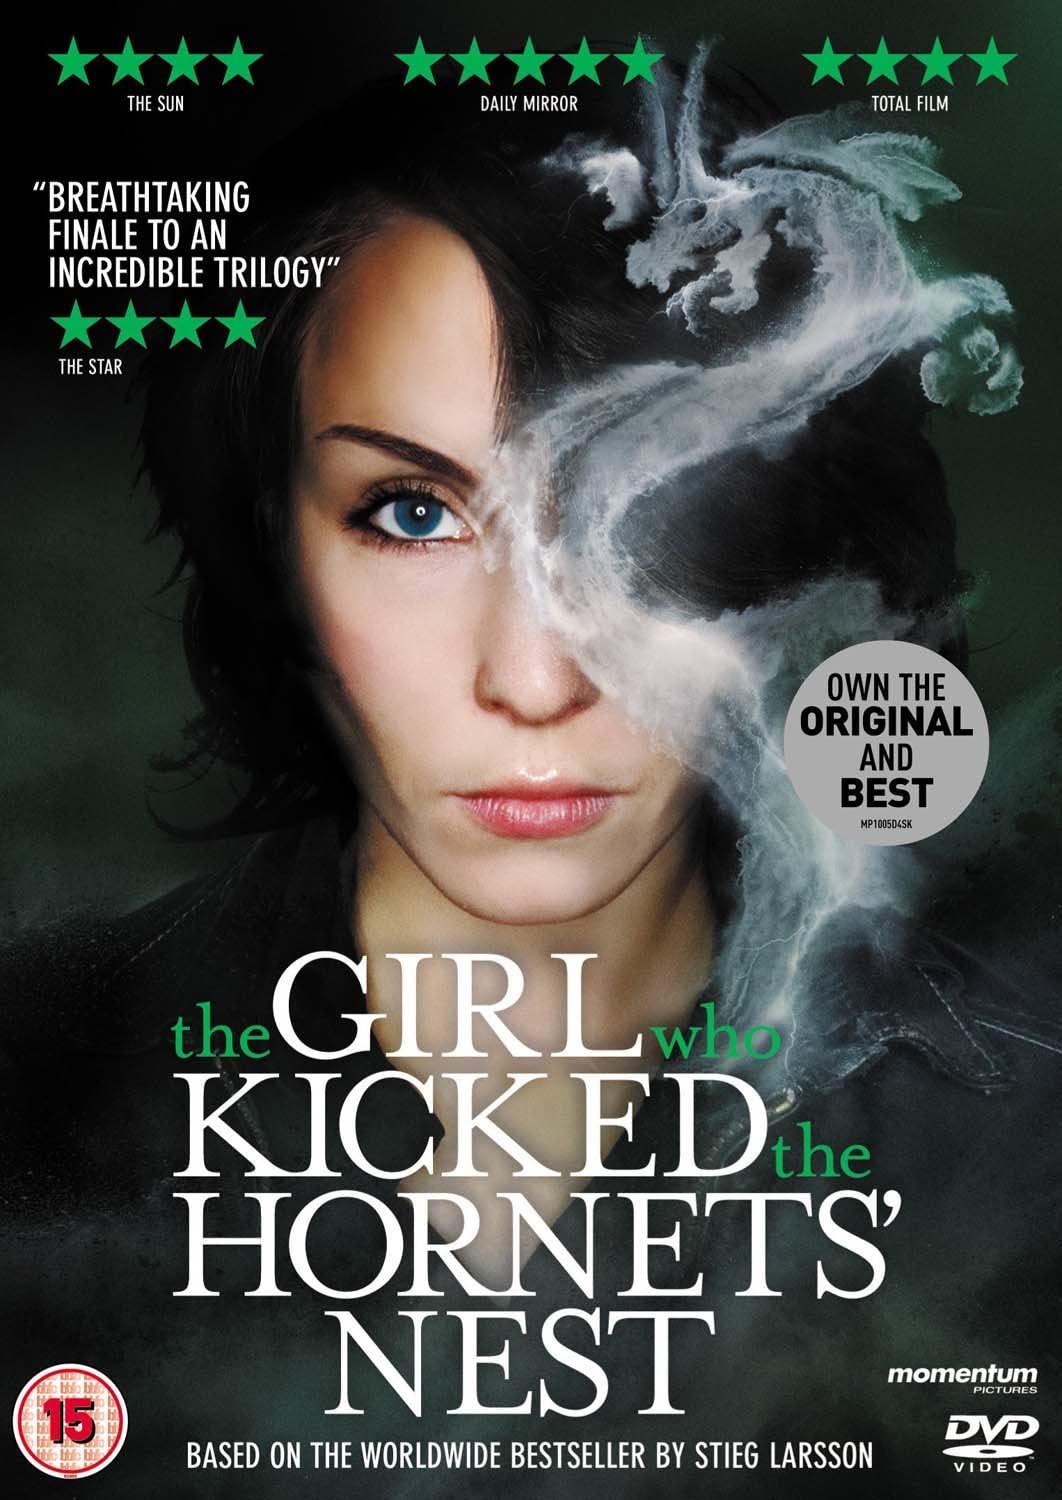 The Girl Who Kicked the Hornets' Nest [2010] (DVD)